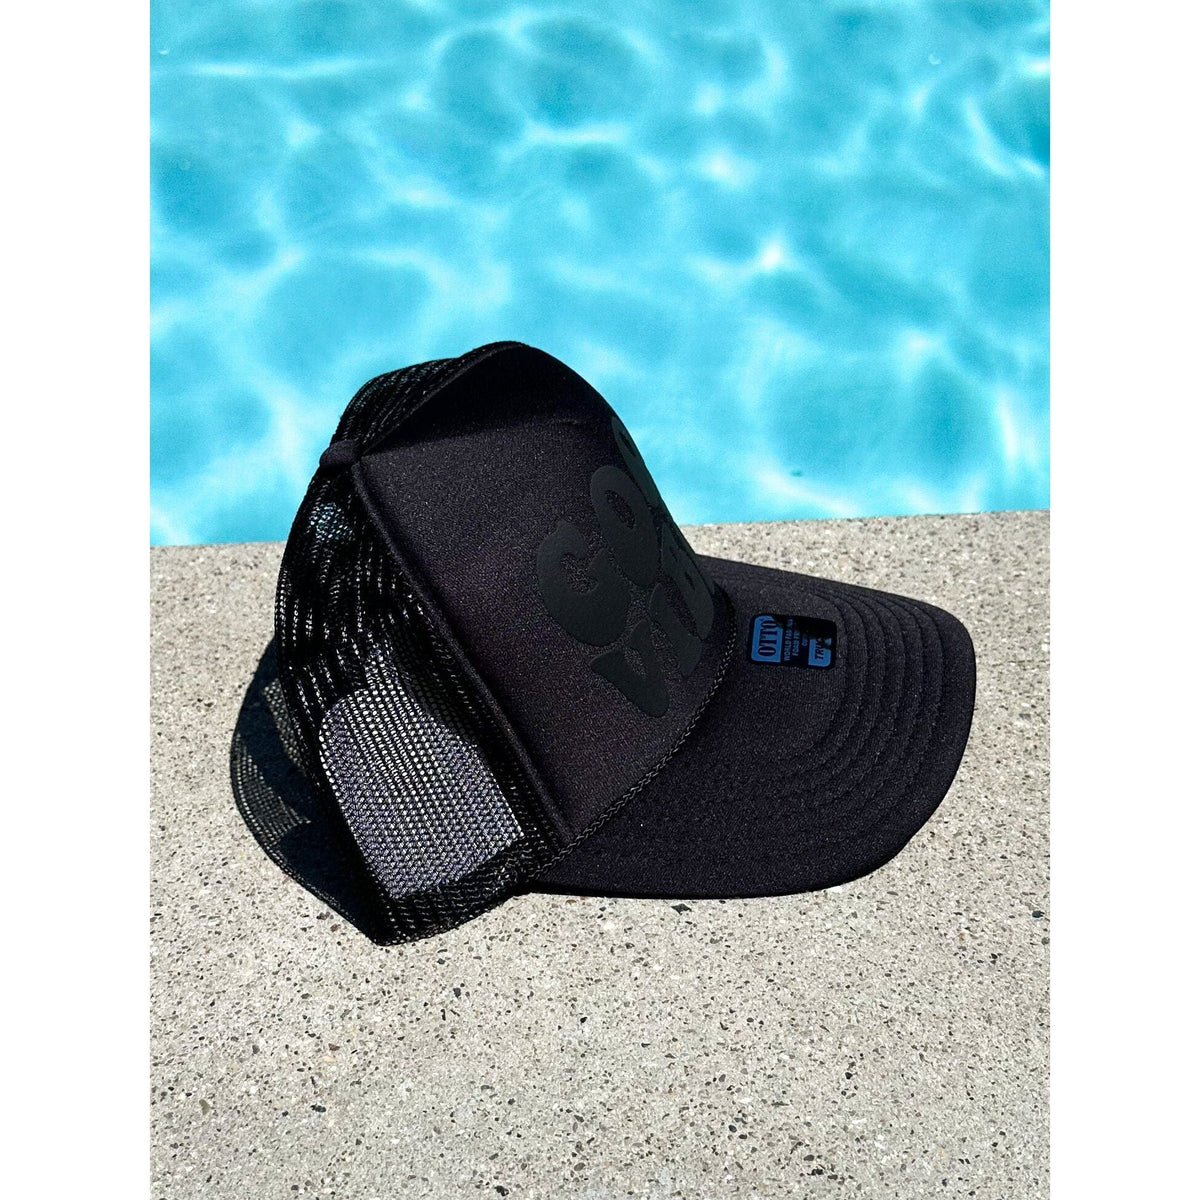 Good Vibes | Black Trucker Hat by Haute Sheet Hats TheFringeCultureCollective